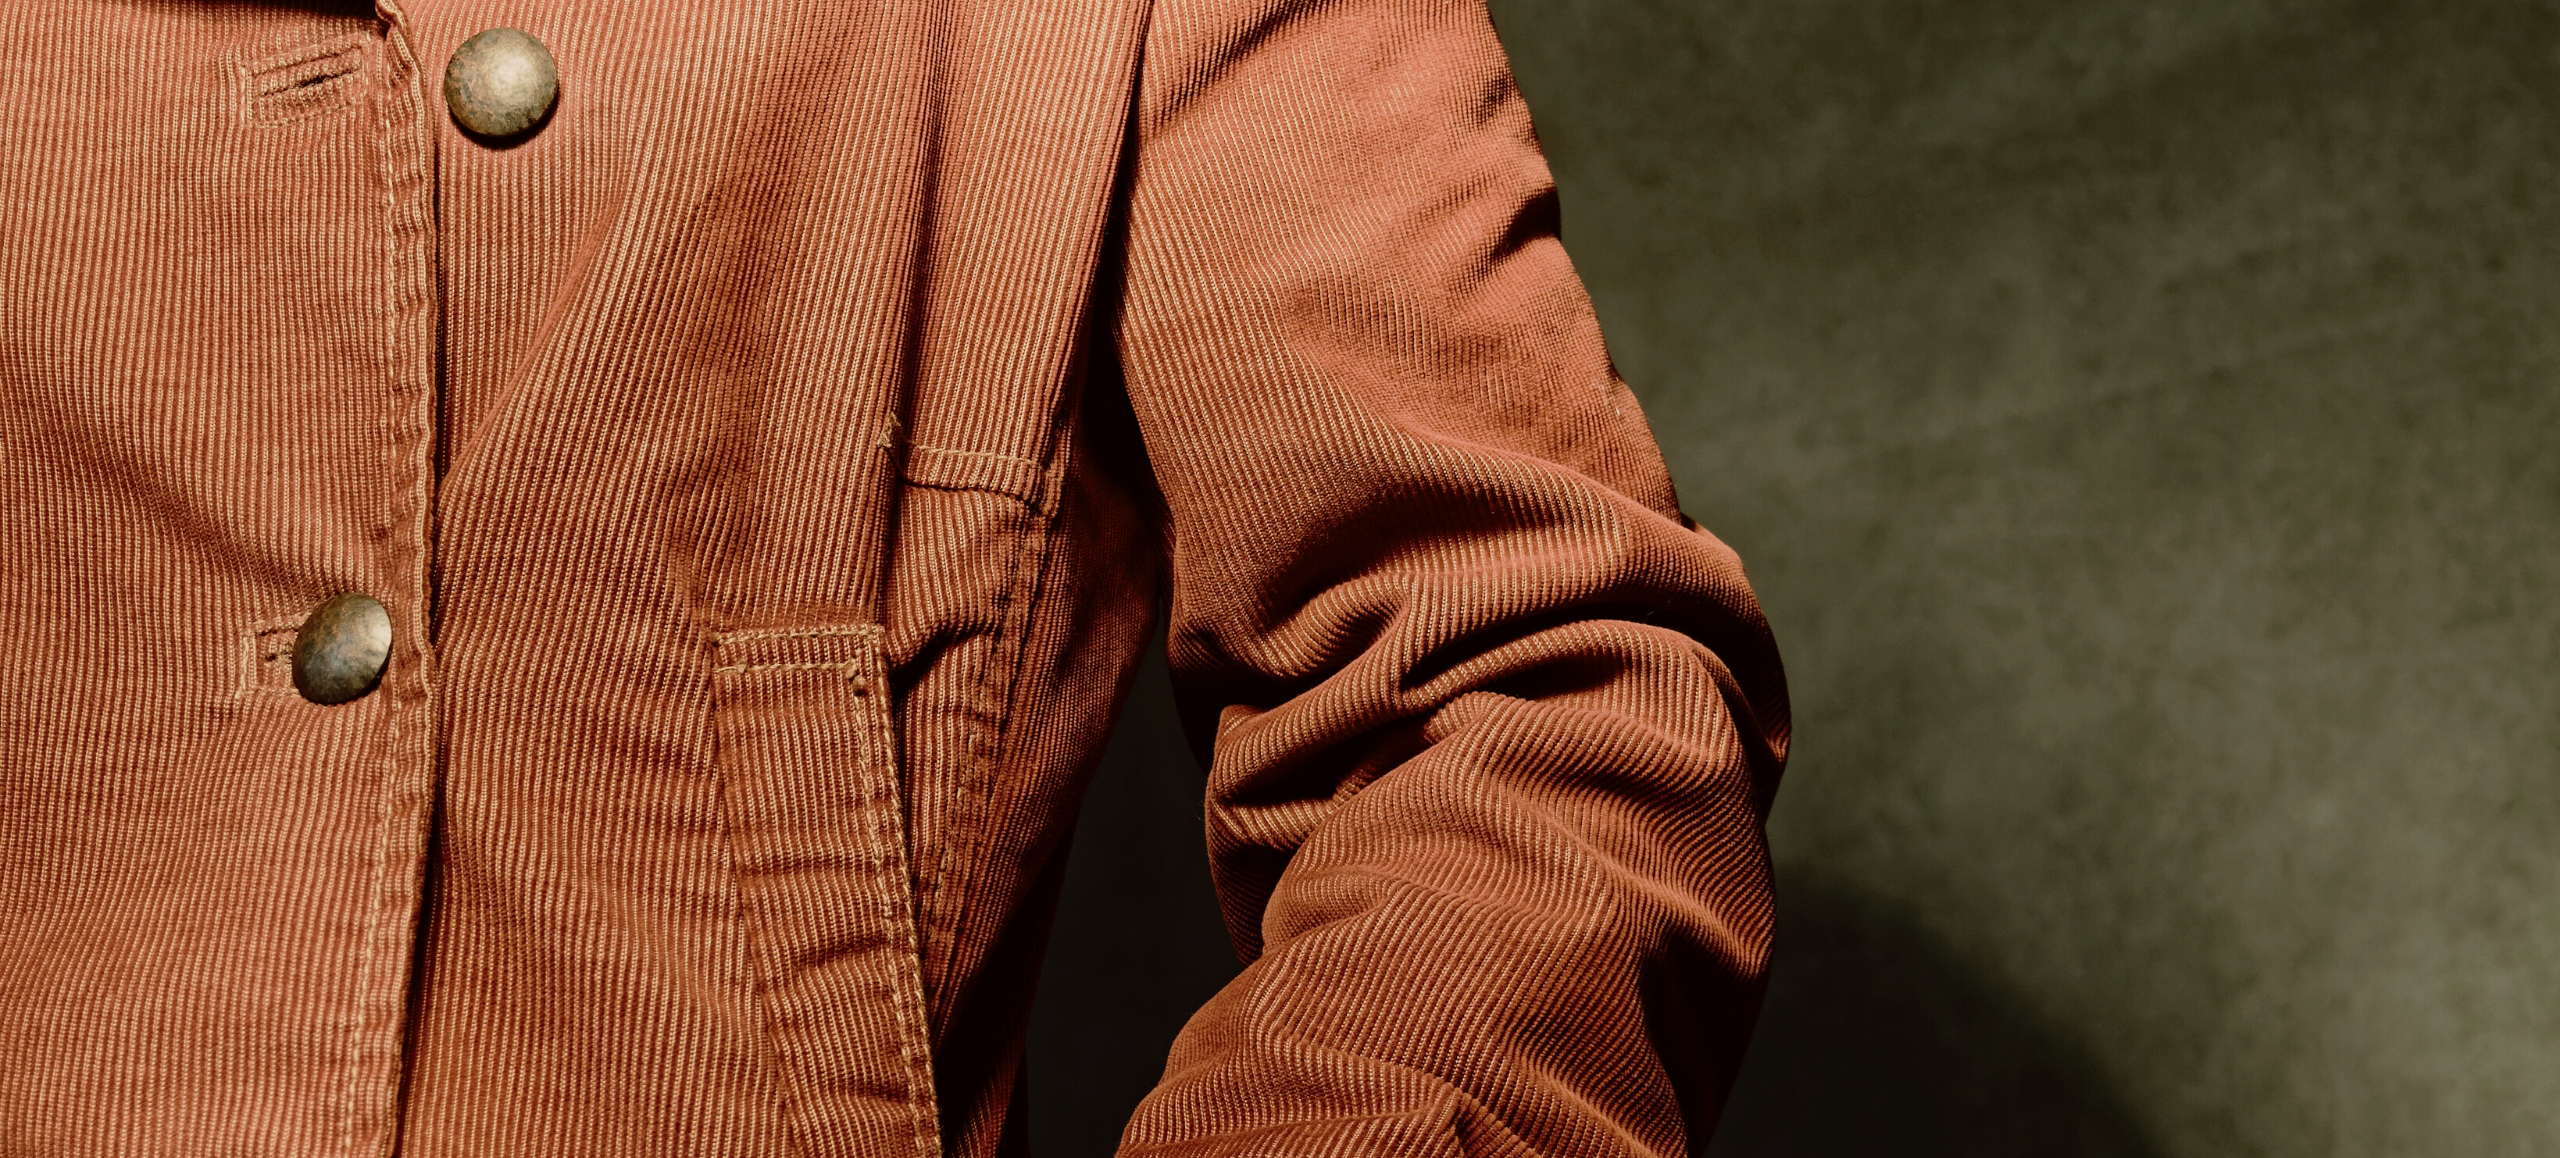 Photo of a person wearing a brown corduroy coat